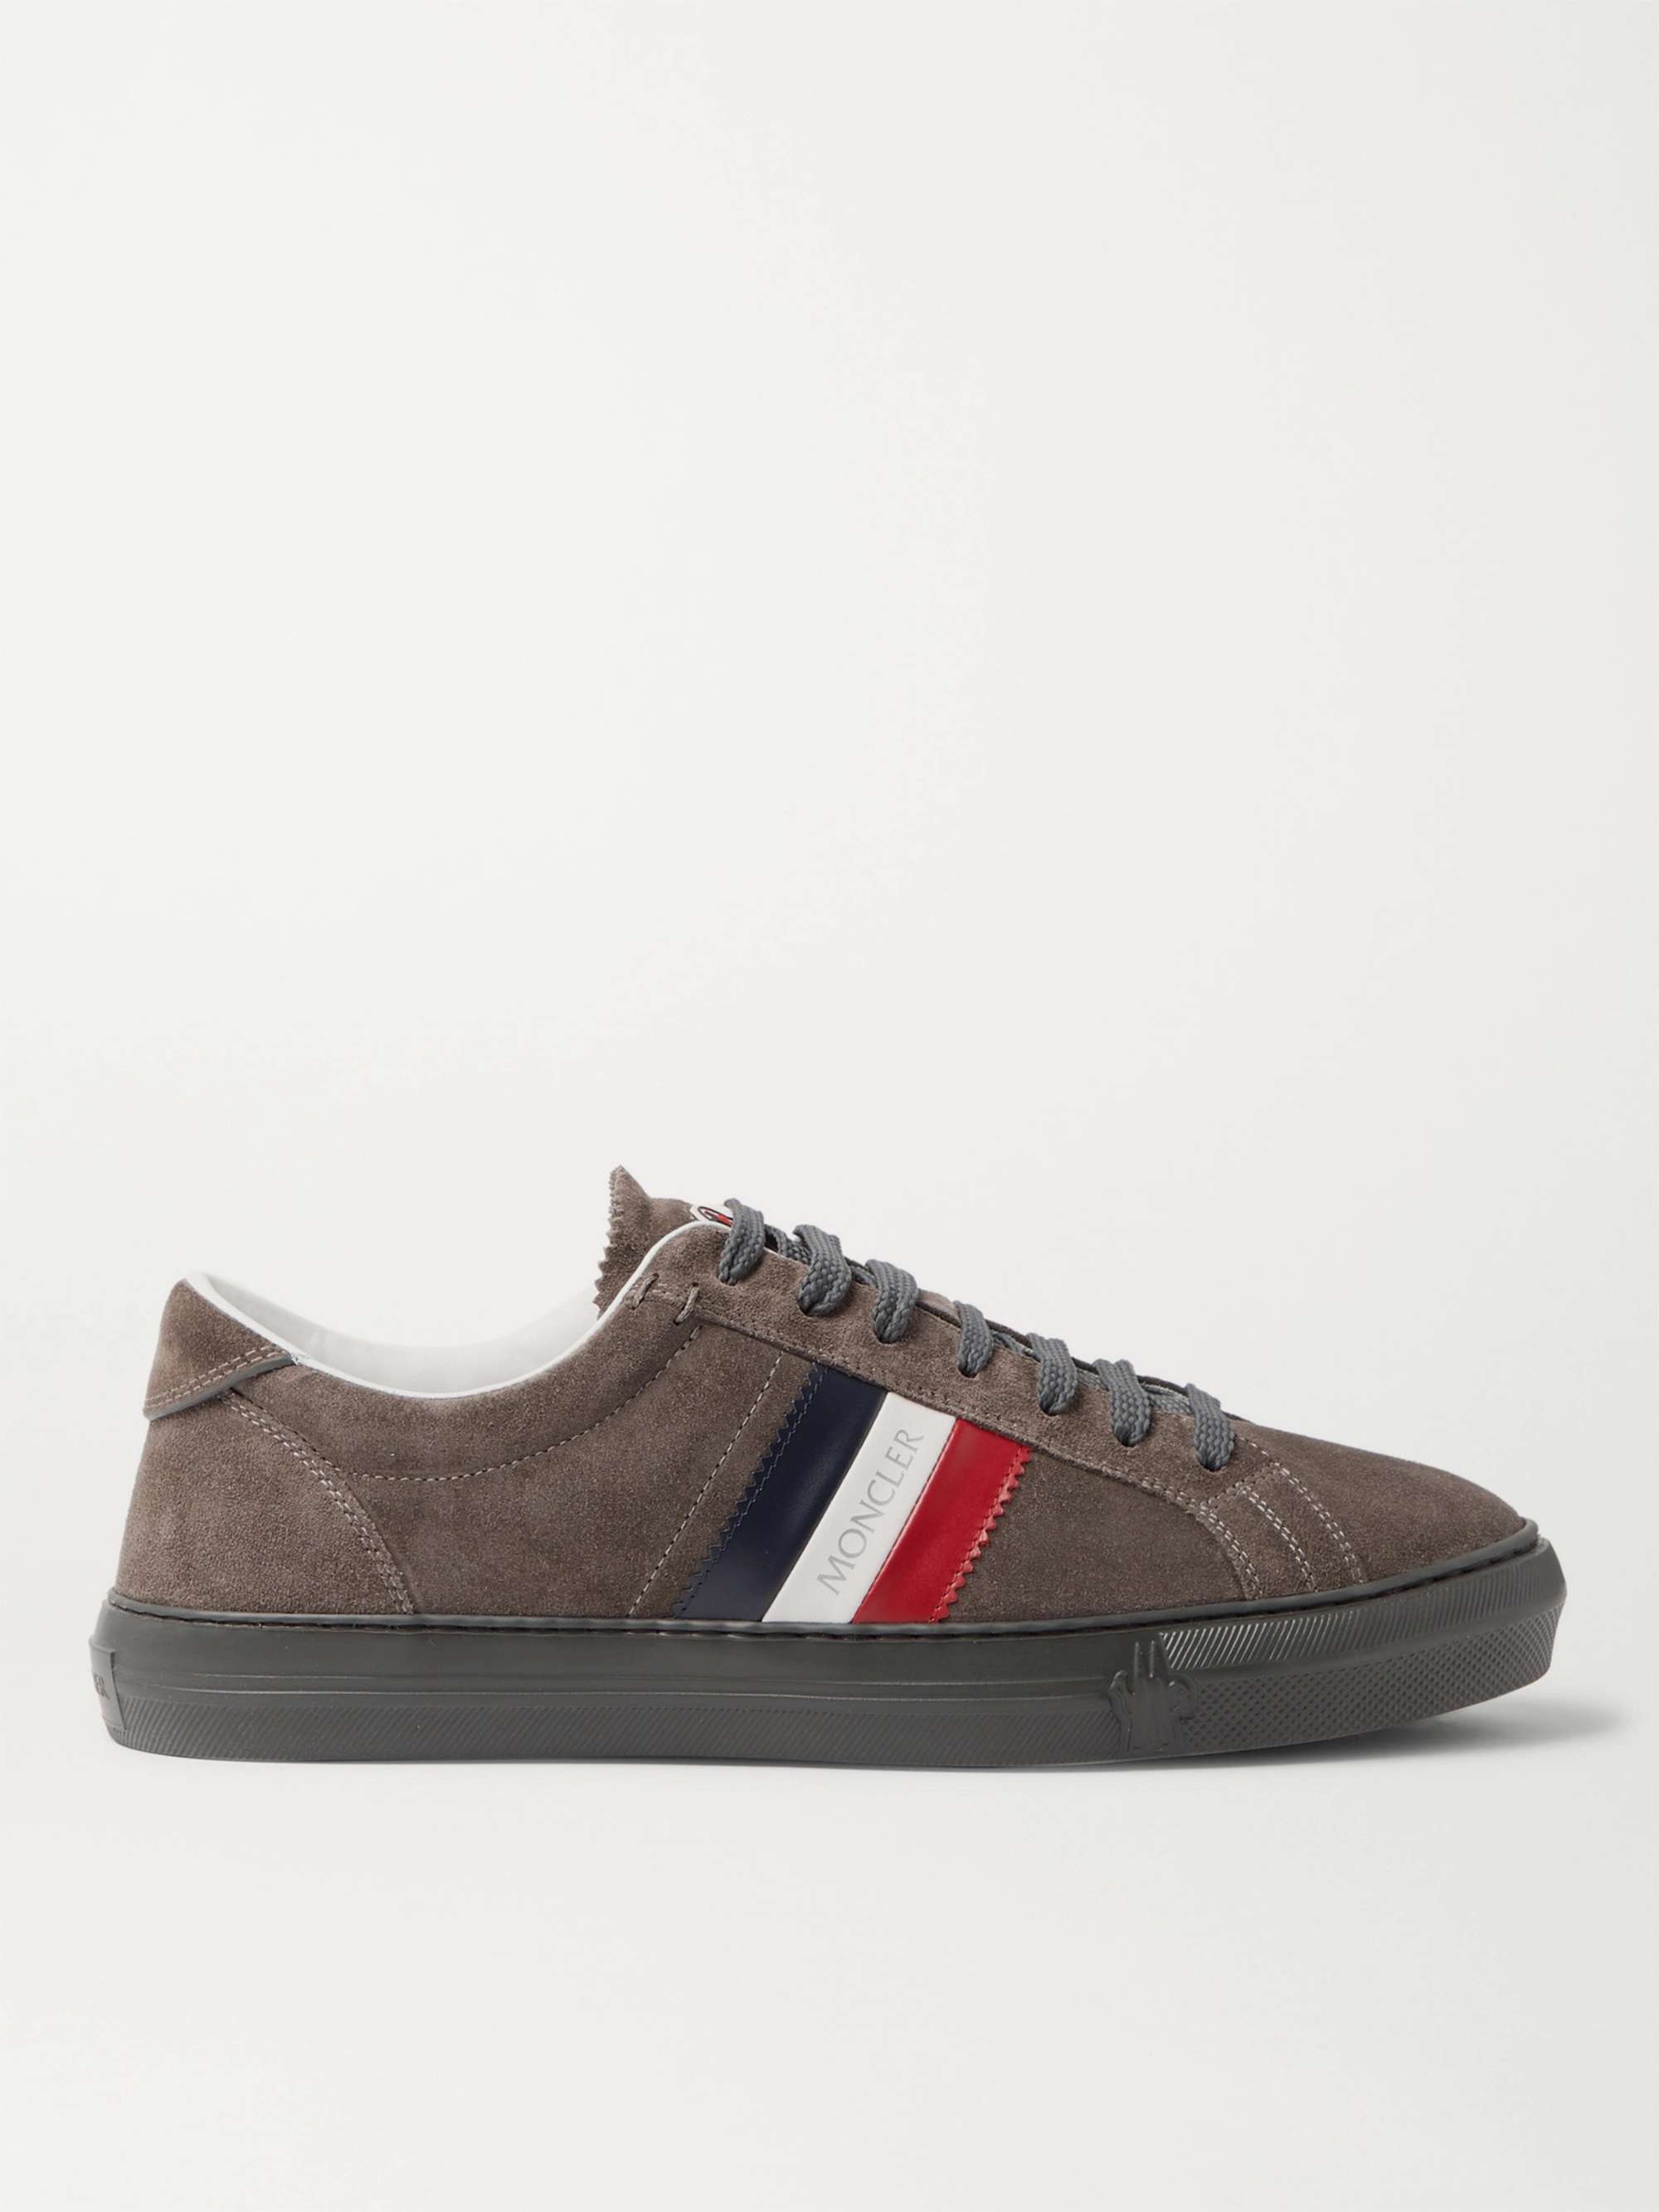 MONCLER New Monaco Suede and Leather Sneakers for Men | MR PORTER